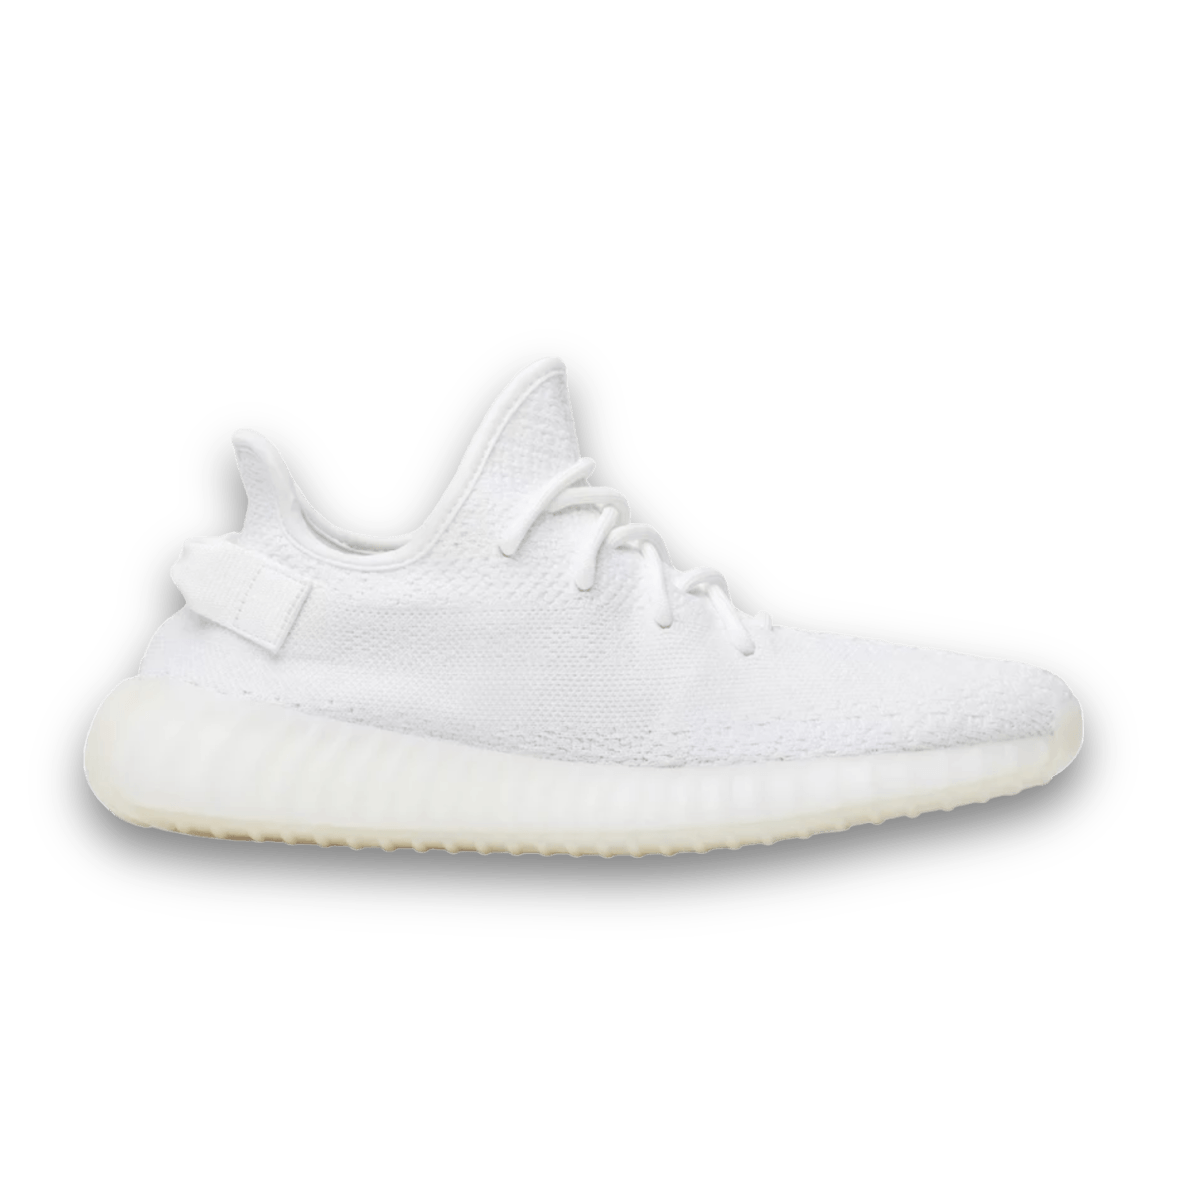 Yeezy Boost 350 V2 'Cream White / Triple White' Gently Enjoyed (Used) - Men 12 - Low Sneaker - Yeezy - Jawns on Fire - sneakers